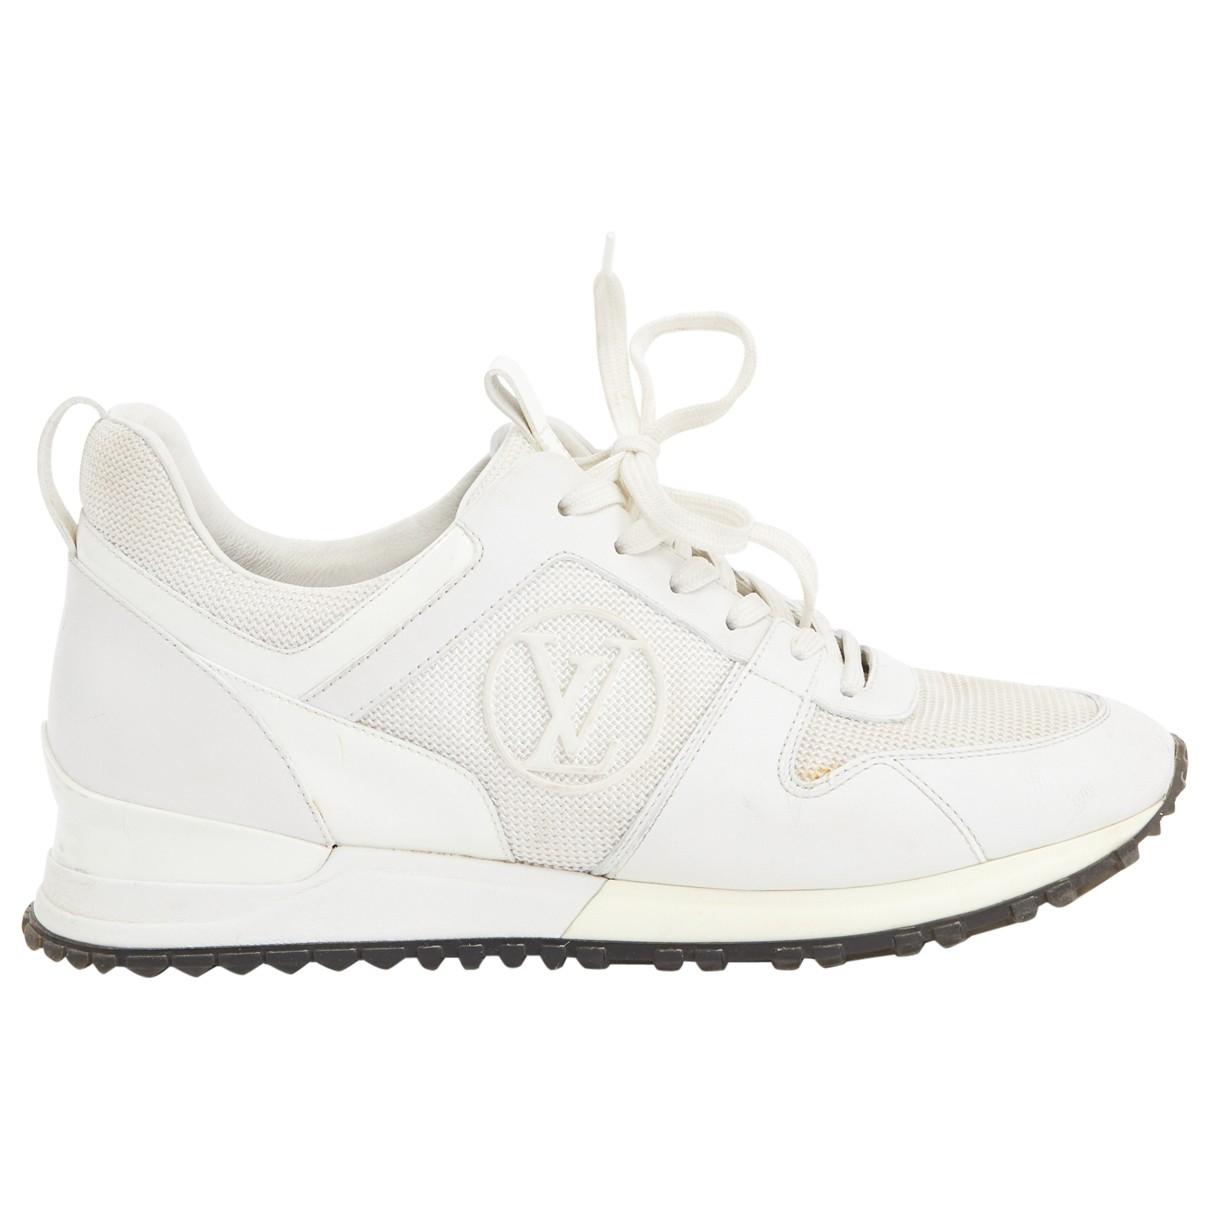 Louis Vuitton on X: For a fashionable foot forward. Run Away Pulse sneakers  are a fitting gift for the #LouisVuitton lover on your list. Visit the  Enchanted World of #LVGifts at